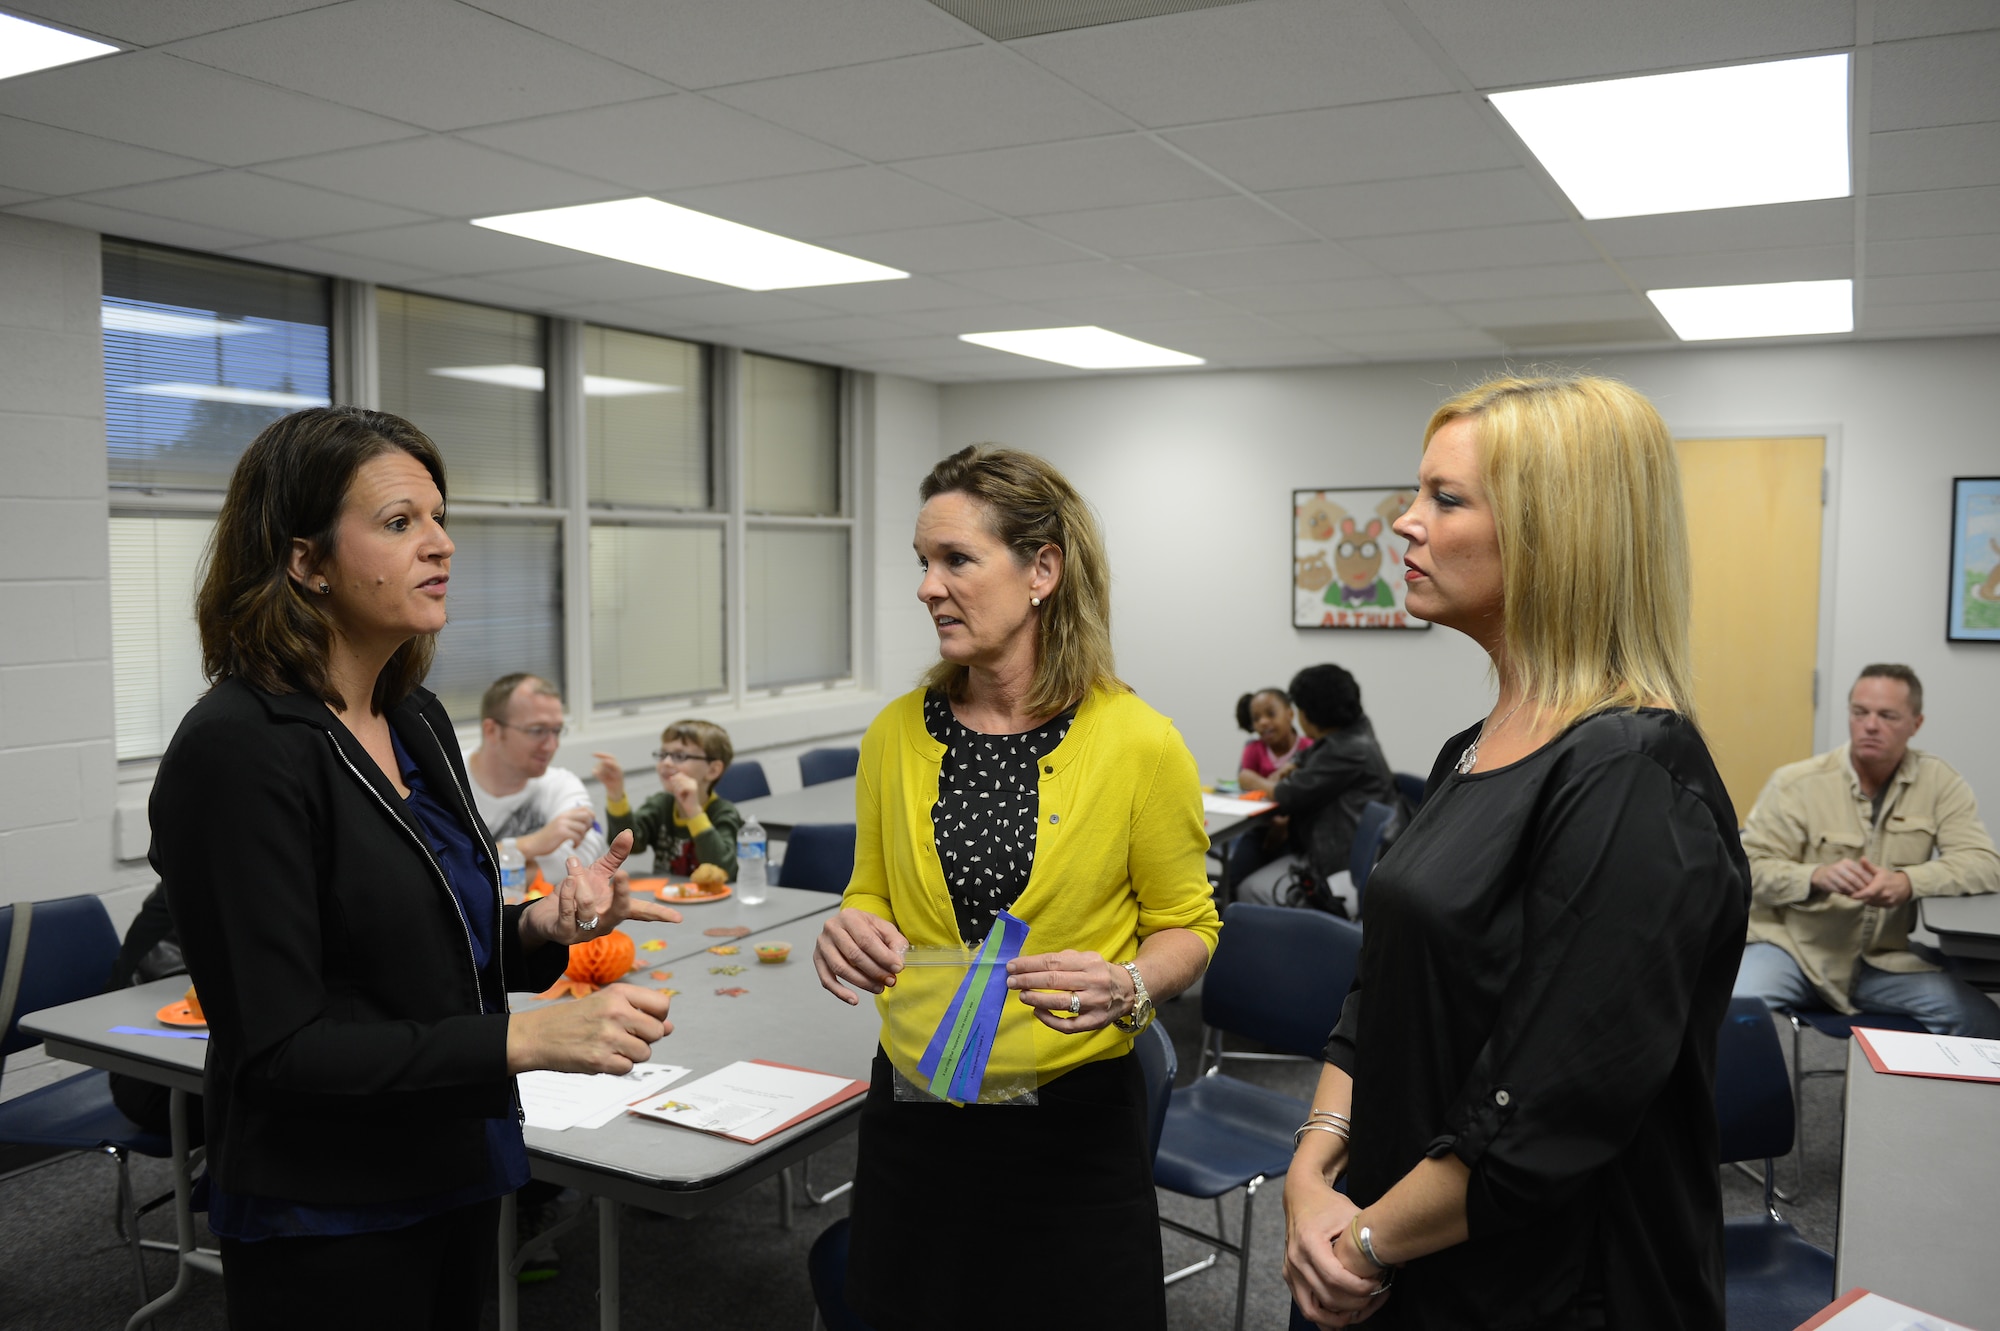 (From left) Dr. Melissa Morris, Shaw Heights Elementary School principal, speaks to Victoria Bailey, local trophy and engraving shop owner and Pam Caine, spouse of Col. Scott Caine, 9th Air Force vice commander about the student, parent workshop held in the school’s multi-purpose room at Shaw Air Force Base, S.C., Nov 13, 2012. As part of the Principal for a Day program, designed to strengthen community ties and academic awareness, Bailey and Caine followed principal Morris throughout the school observing her daily roles as principal. (U.S. Air Force photo by Airman 1st Class Daniel Blackwell/Released)